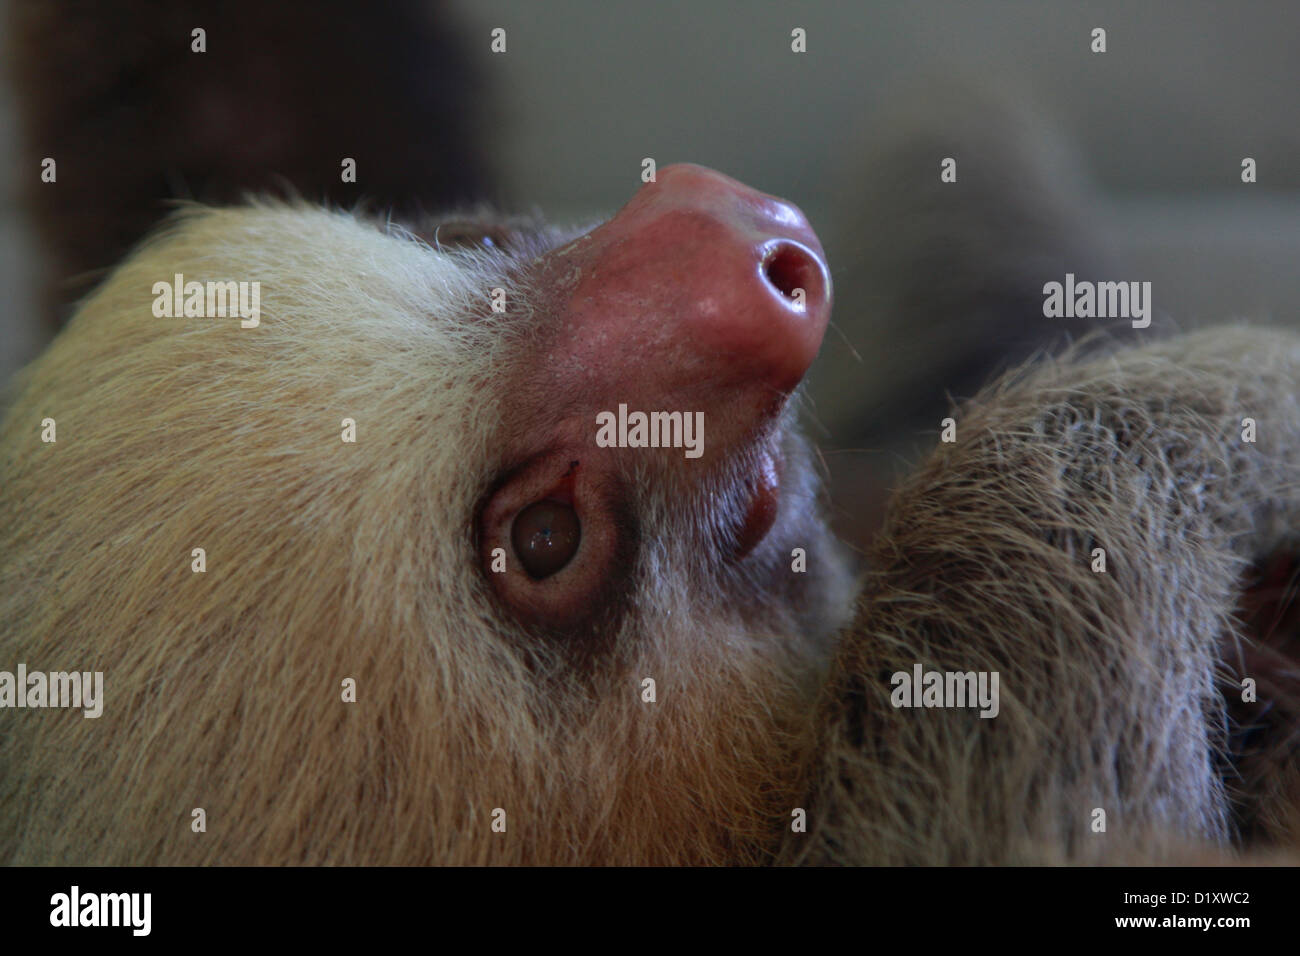 portrait of a baby sloth, Stock Photo